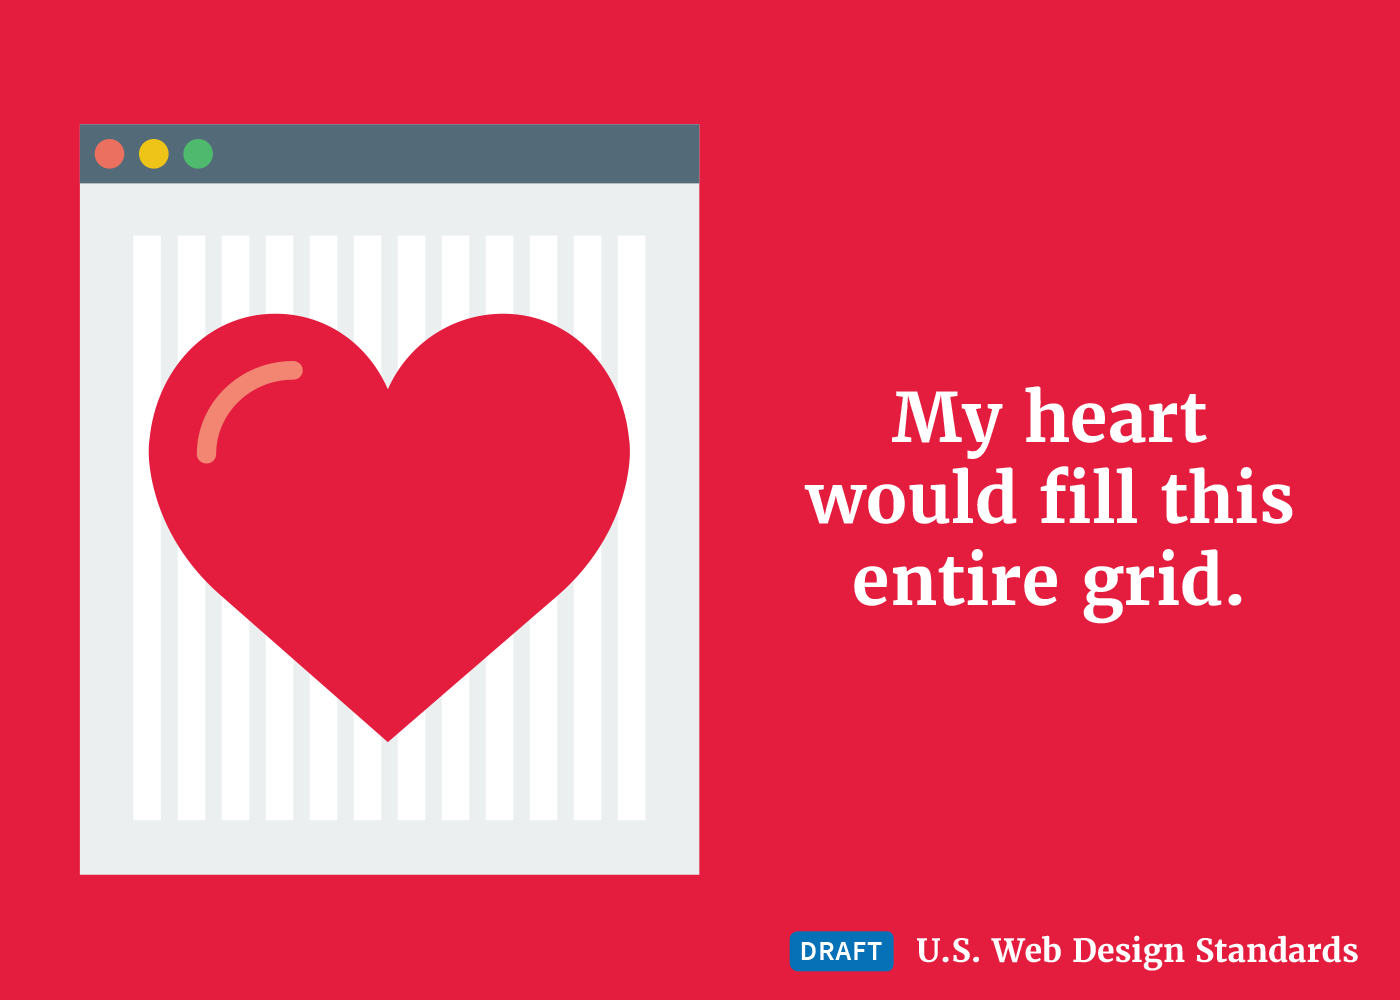 A heart superimposed over the draft web standards grid